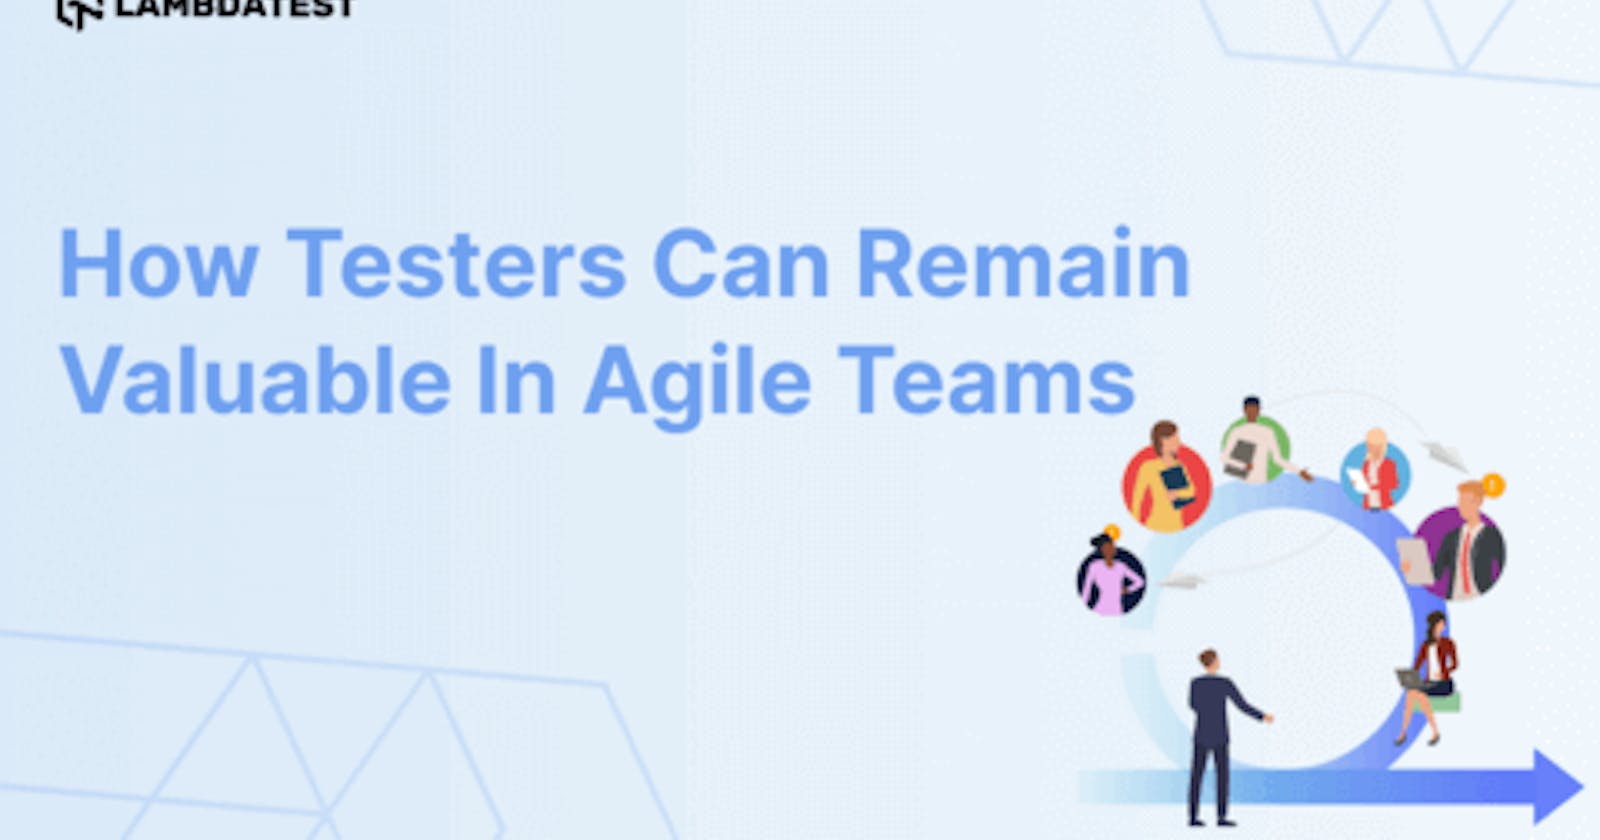 How Testers Can Remain Valuable in Agile Teams